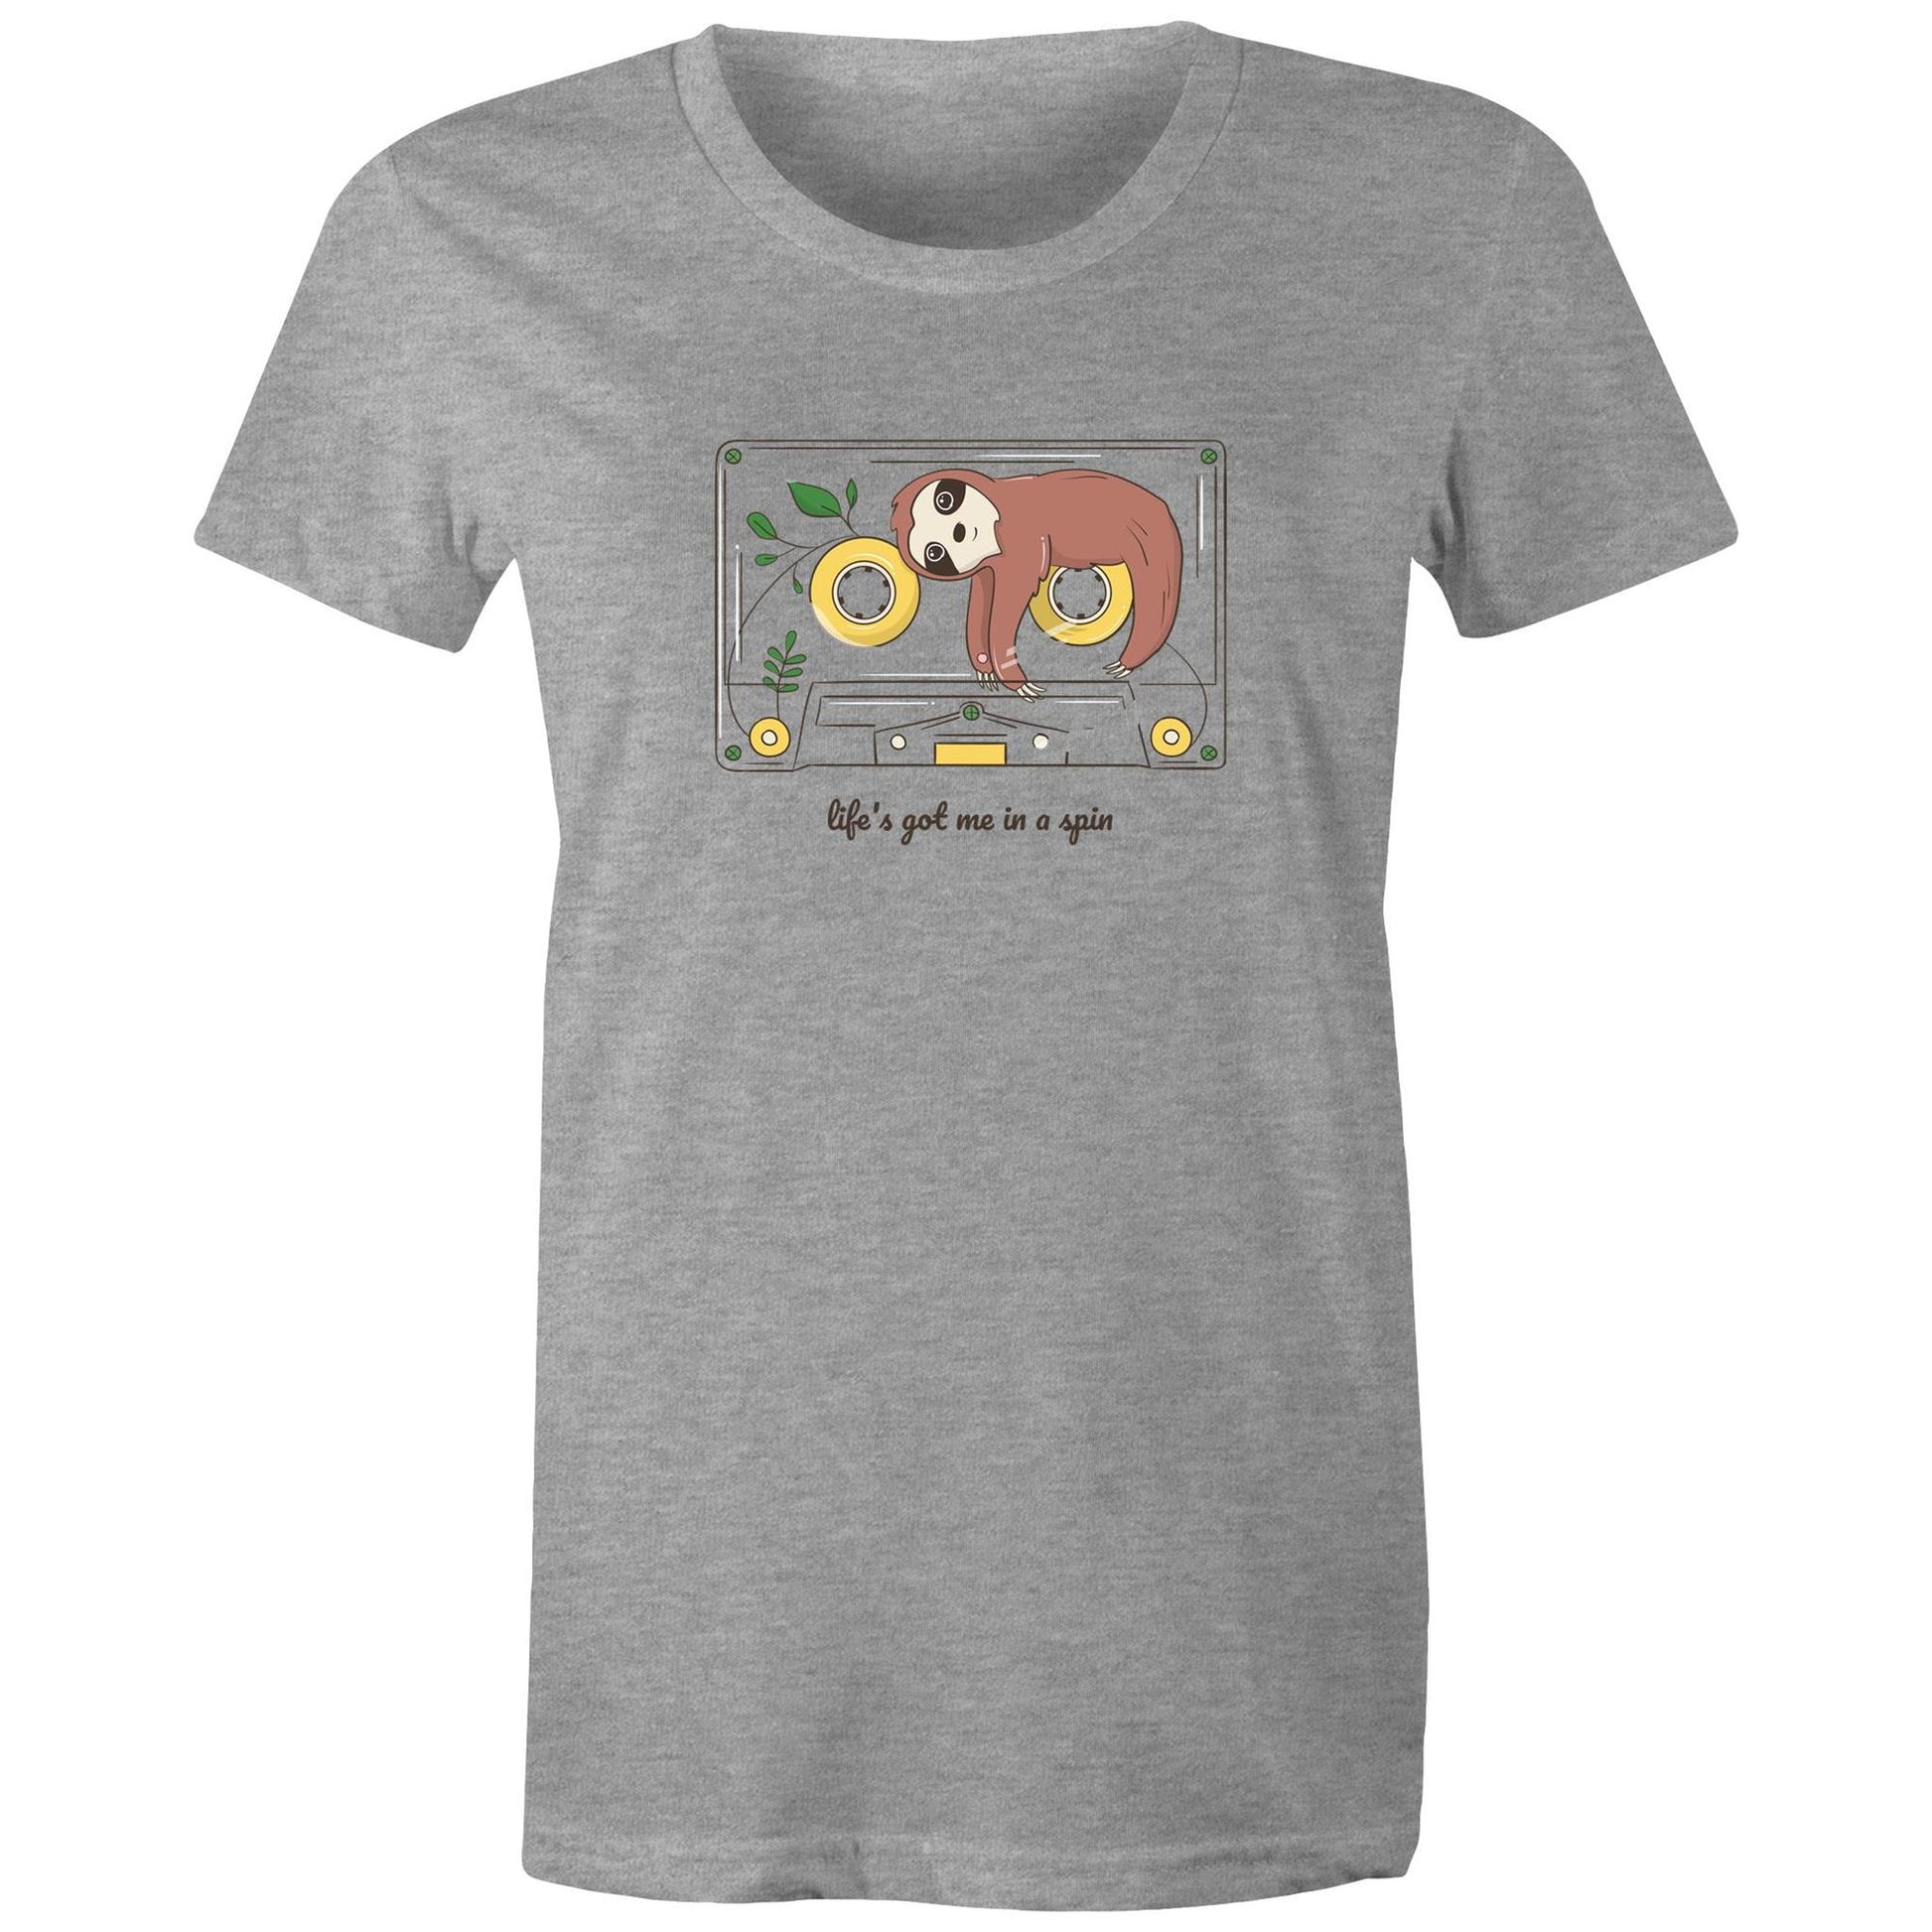 Cassette, Life's Got Me In A Spin - Womens T-shirt Grey Marle Womens T-shirt animal Music Retro